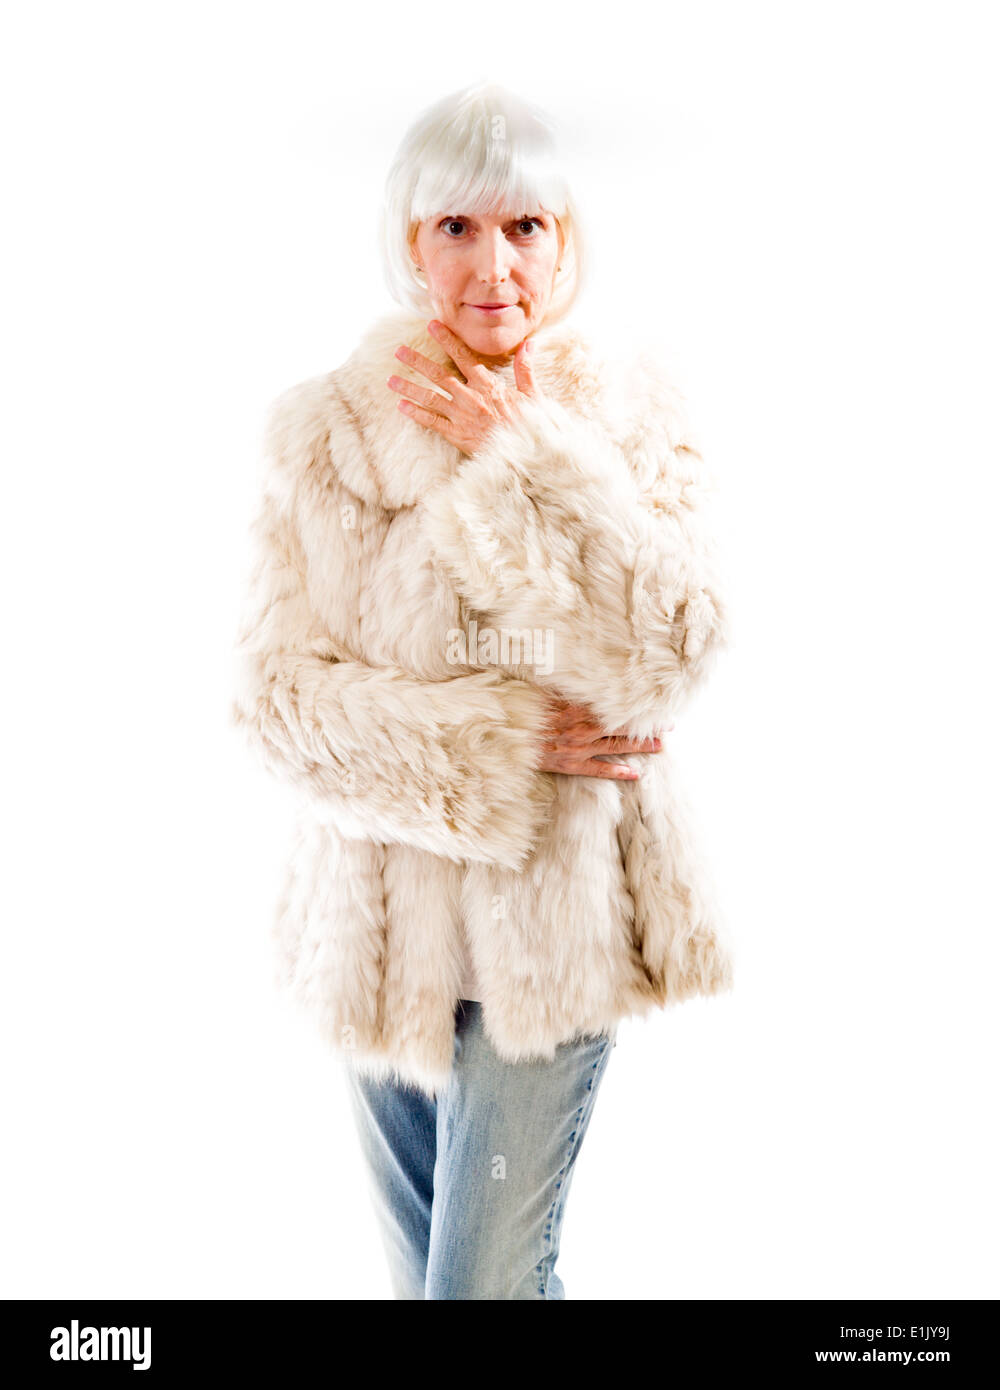 Senior woman standing with her hand on chin Stock Photo